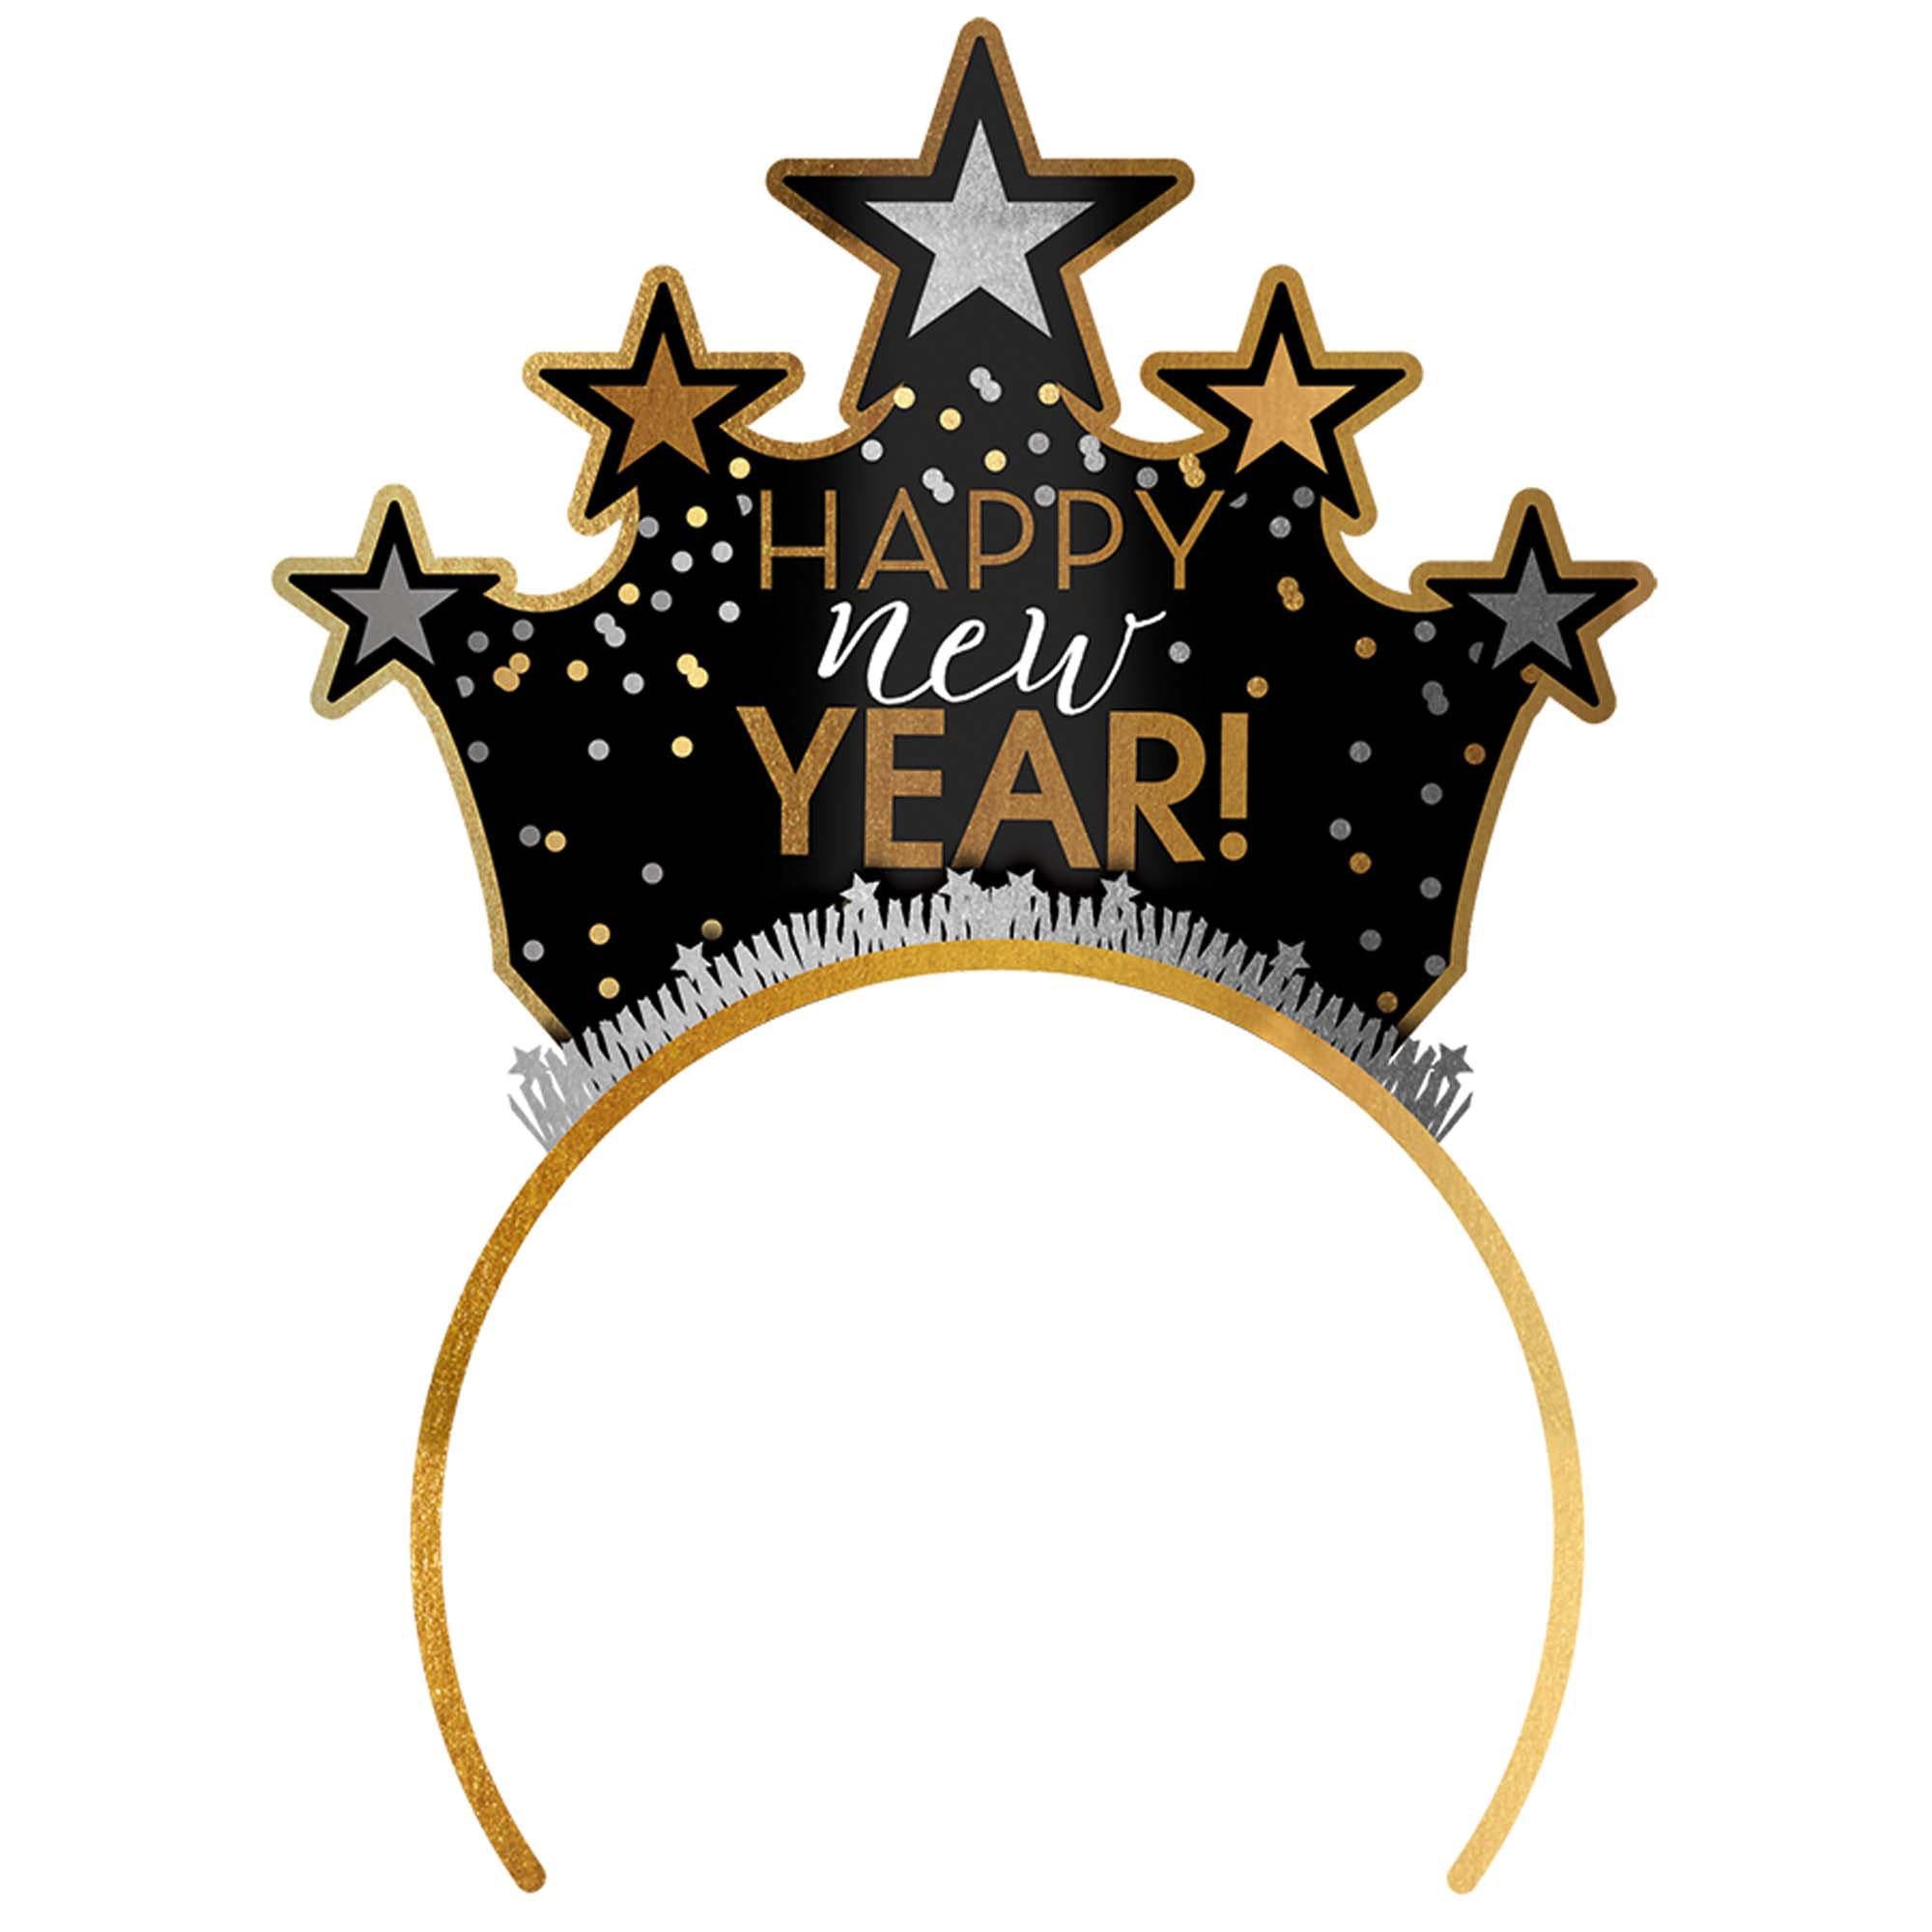 Happy New Year Foil Tiara Costumes & Apparel - Party Centre